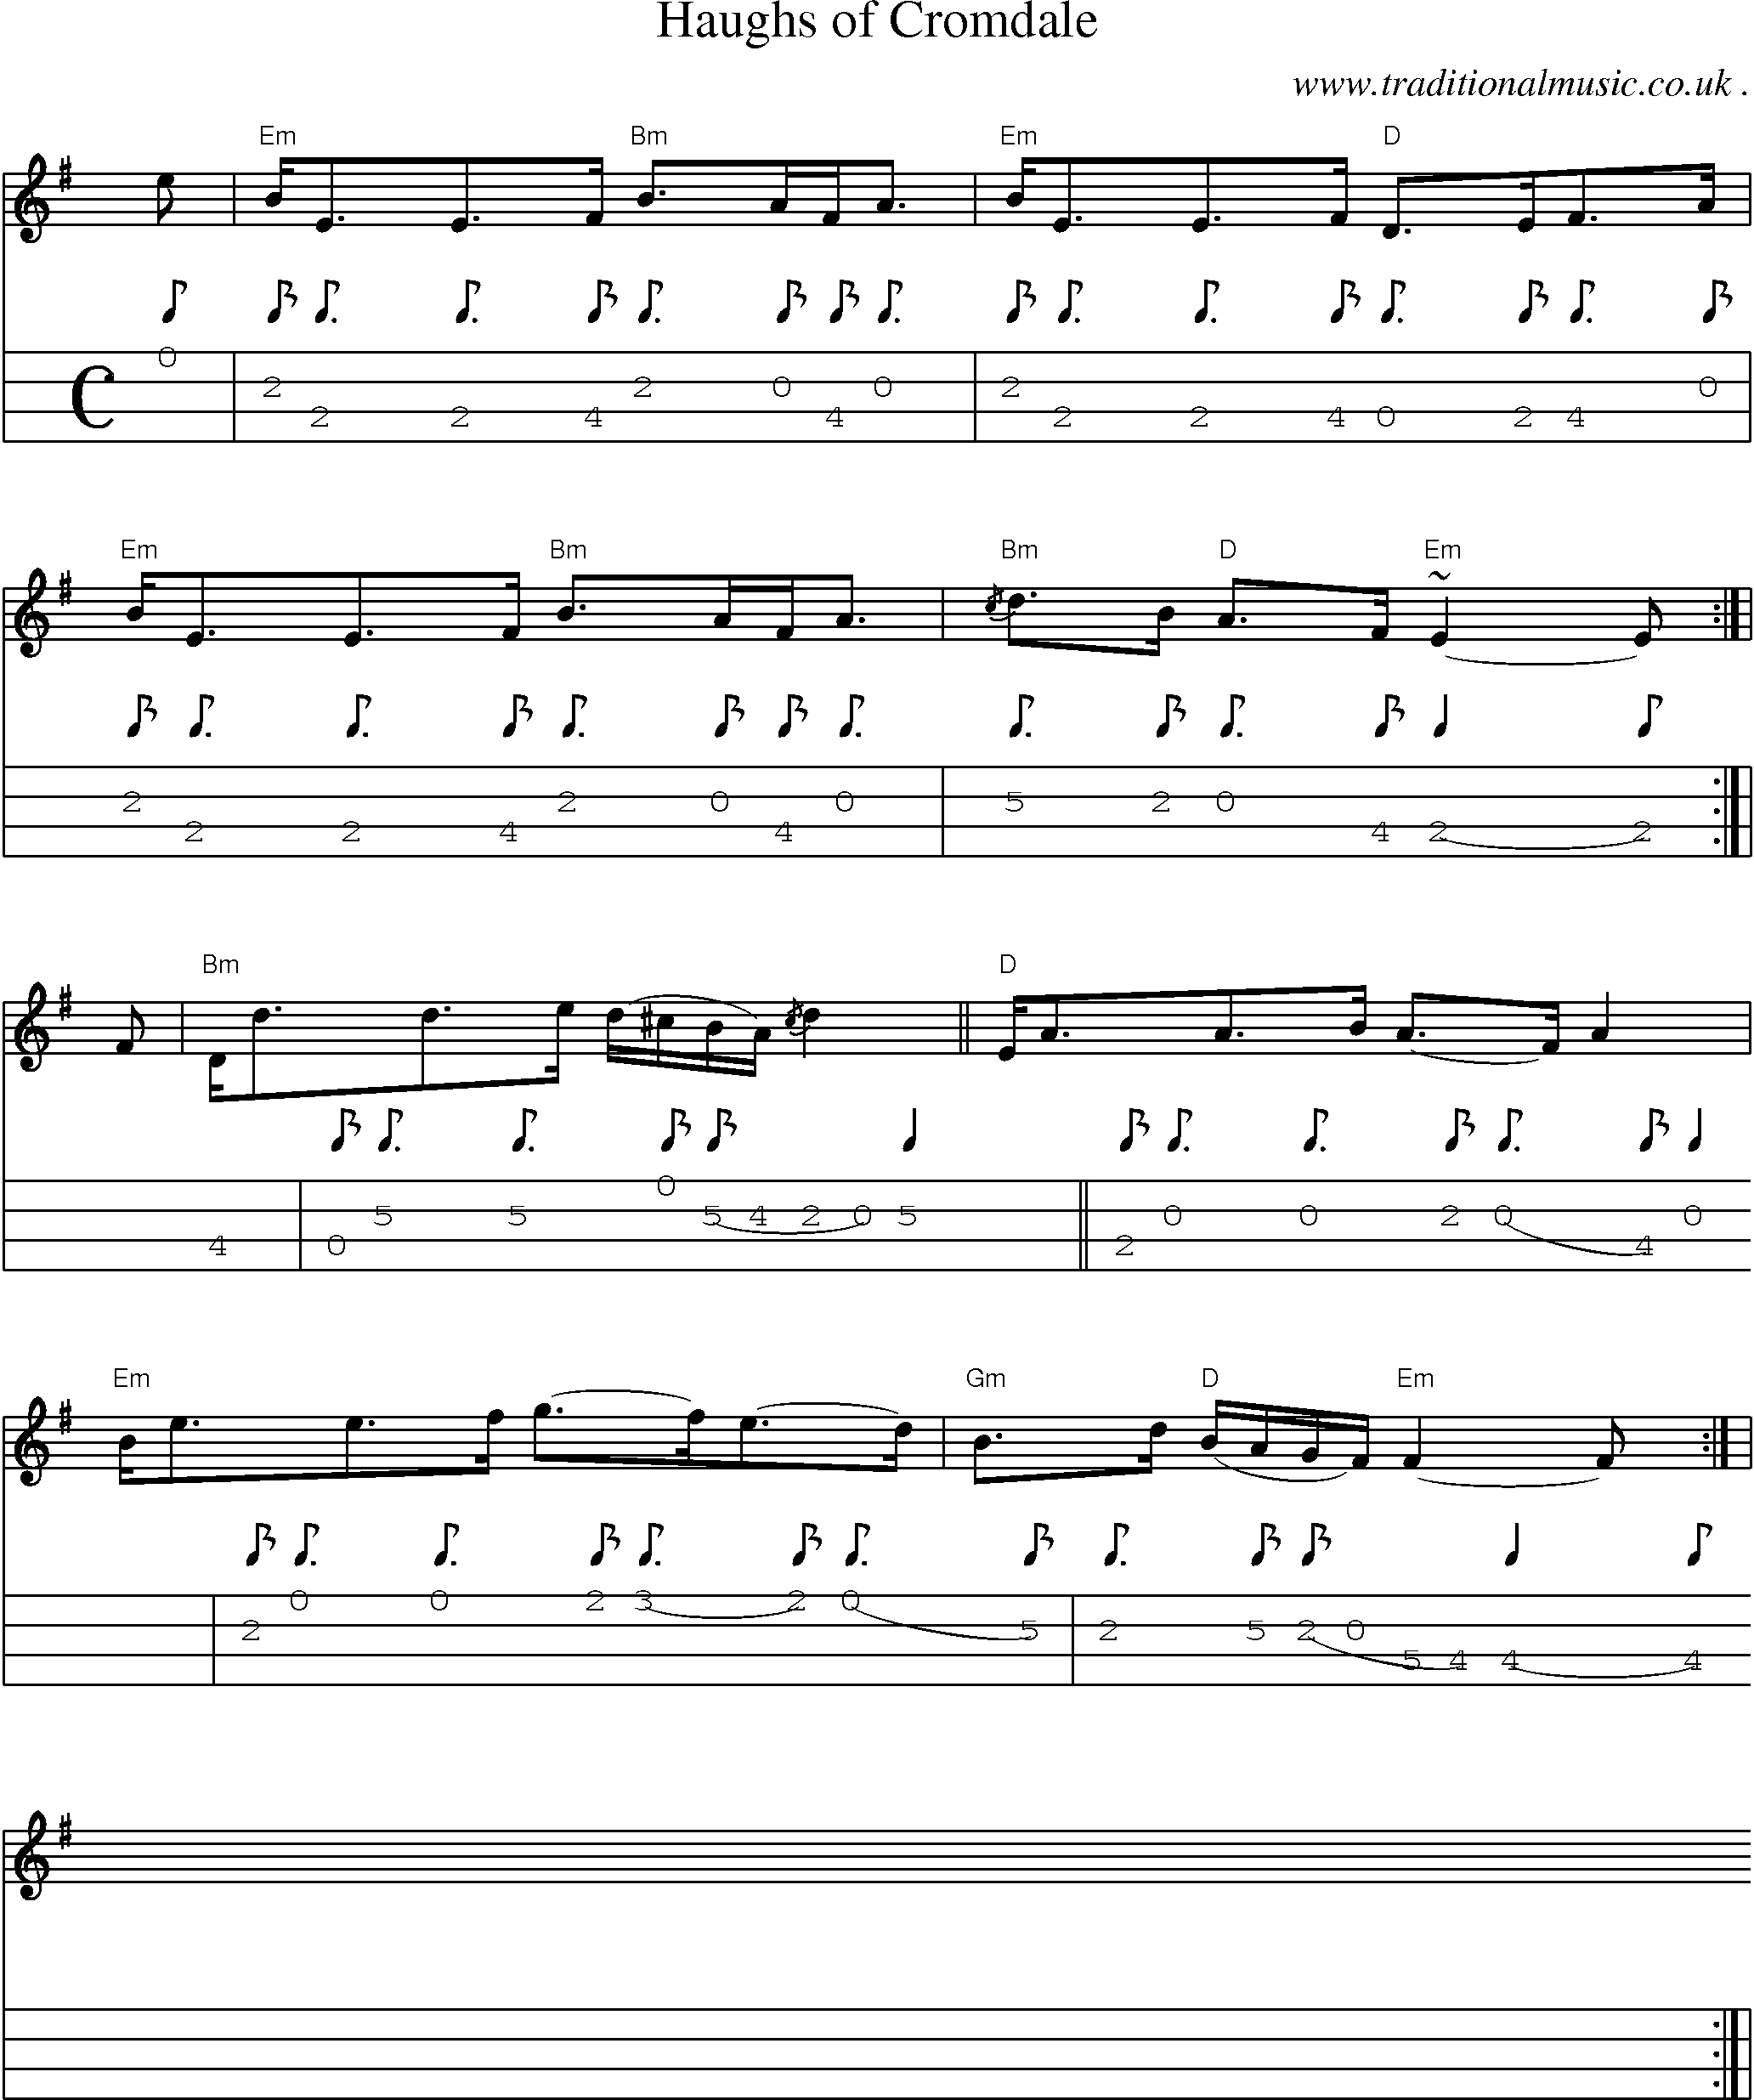 Sheet-music  score, Chords and Mandolin Tabs for Haughs Of Cromdale